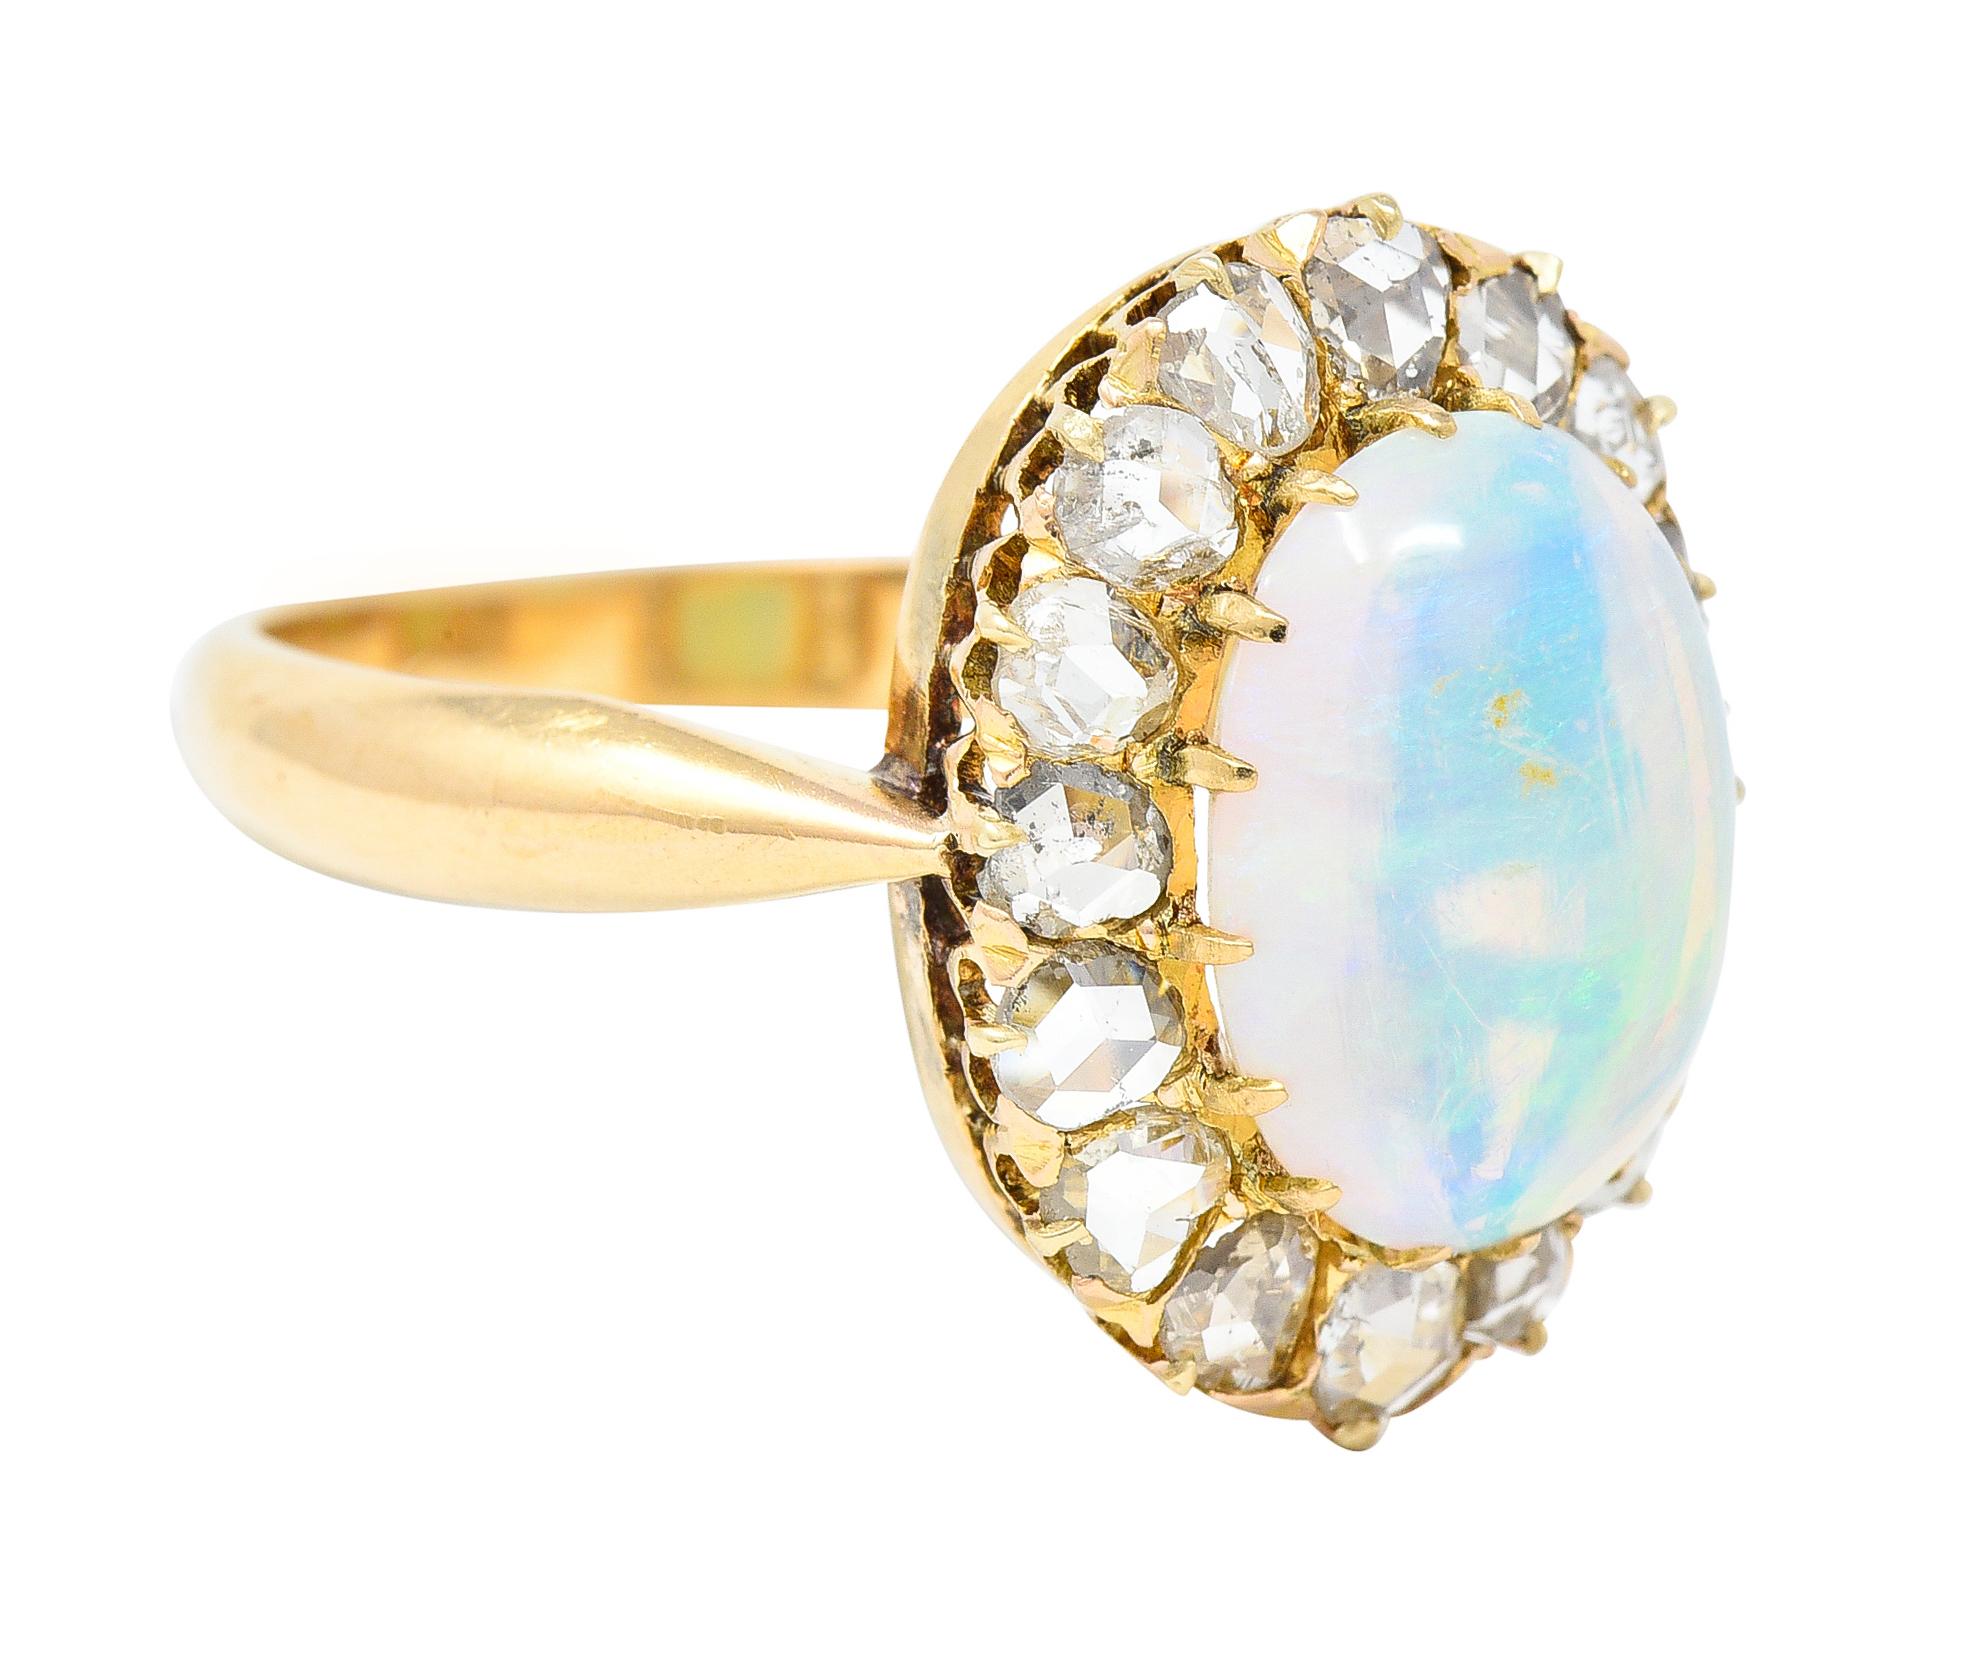 Centering an oval shaped opal cabochon measuring 8.25 x 11.75 mm. Translucent white in body color with spectral play-of-color. Prong set with a halo surround of rose cut diamonds. Weighing approximately 1.30 carats total. H/I color with VS2 clarity.